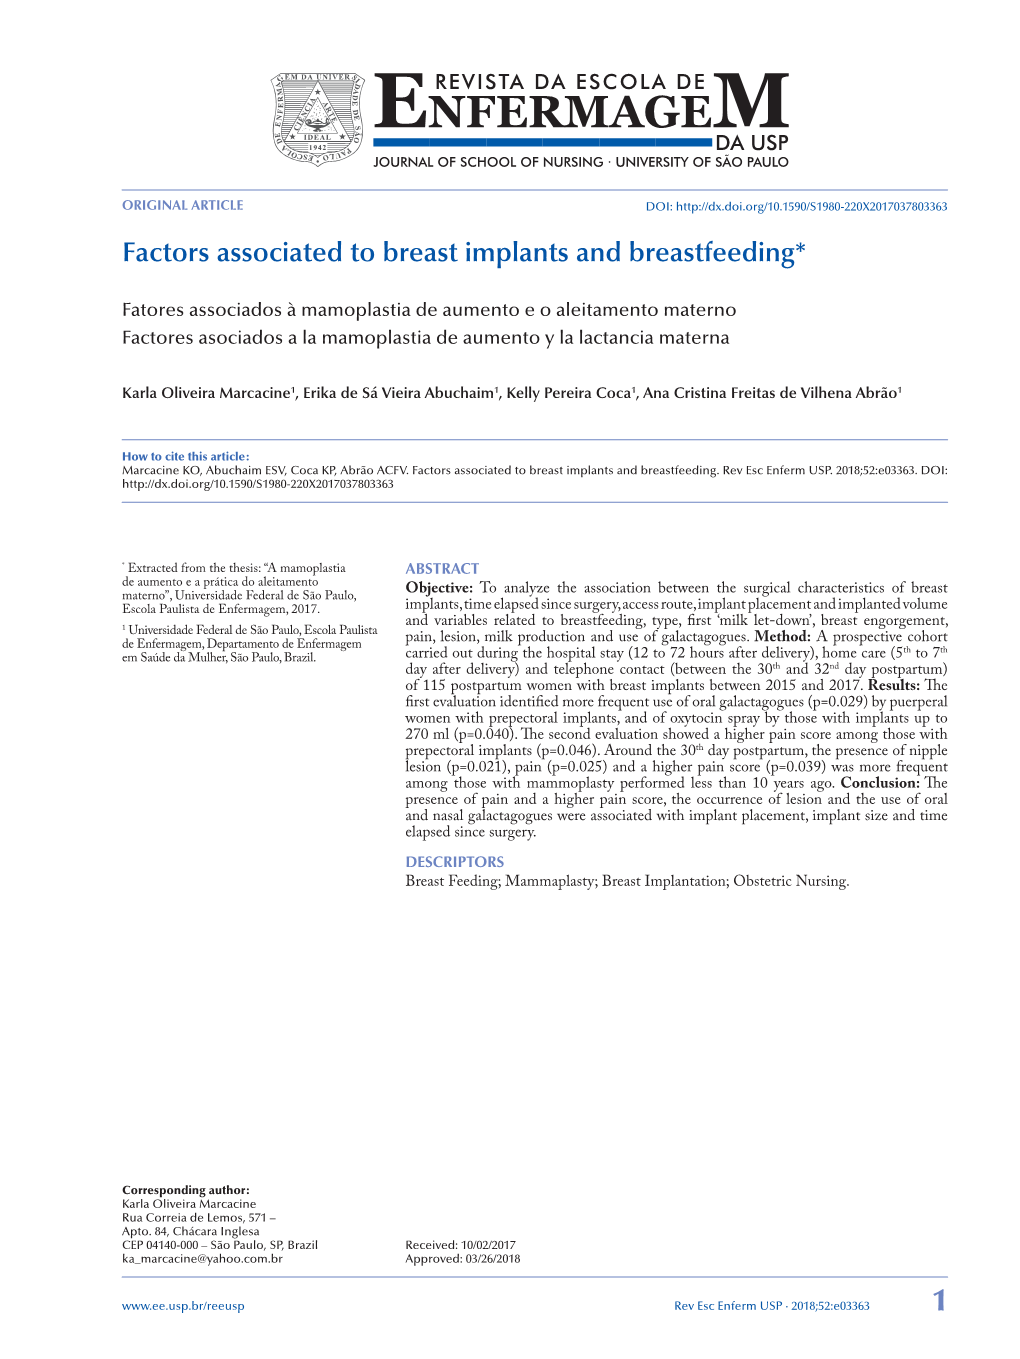 Factors Associated to Breast Implants and Breastfeeding*